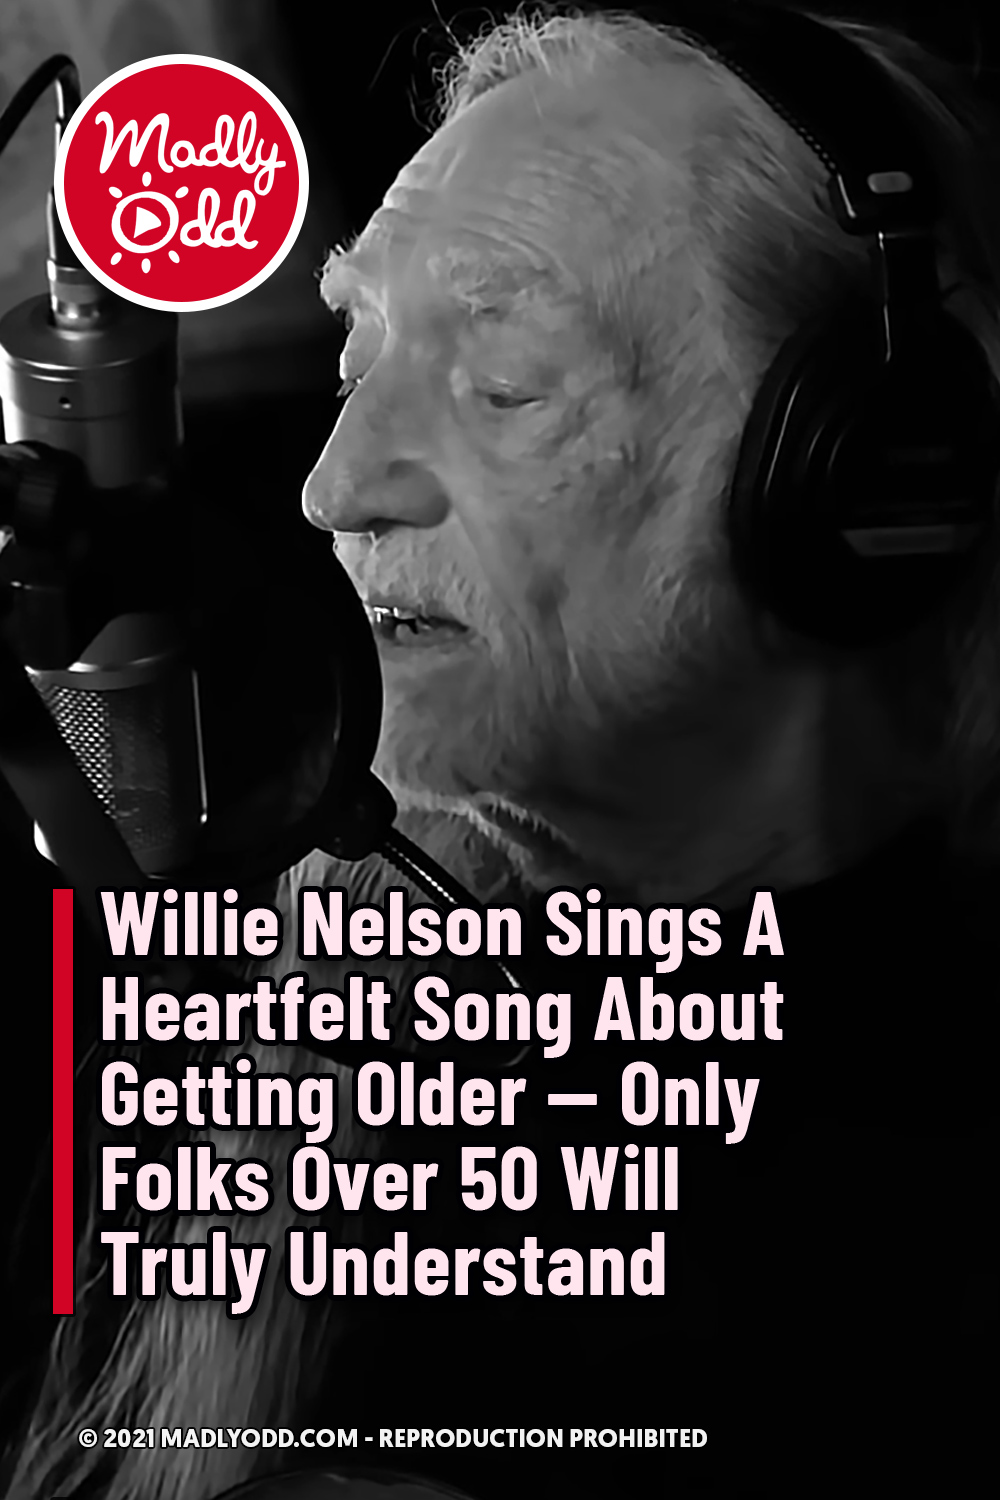 Willie Nelson Sings A Heartfelt Song About Getting Older — Only Folks Over 50 Will Truly Understand